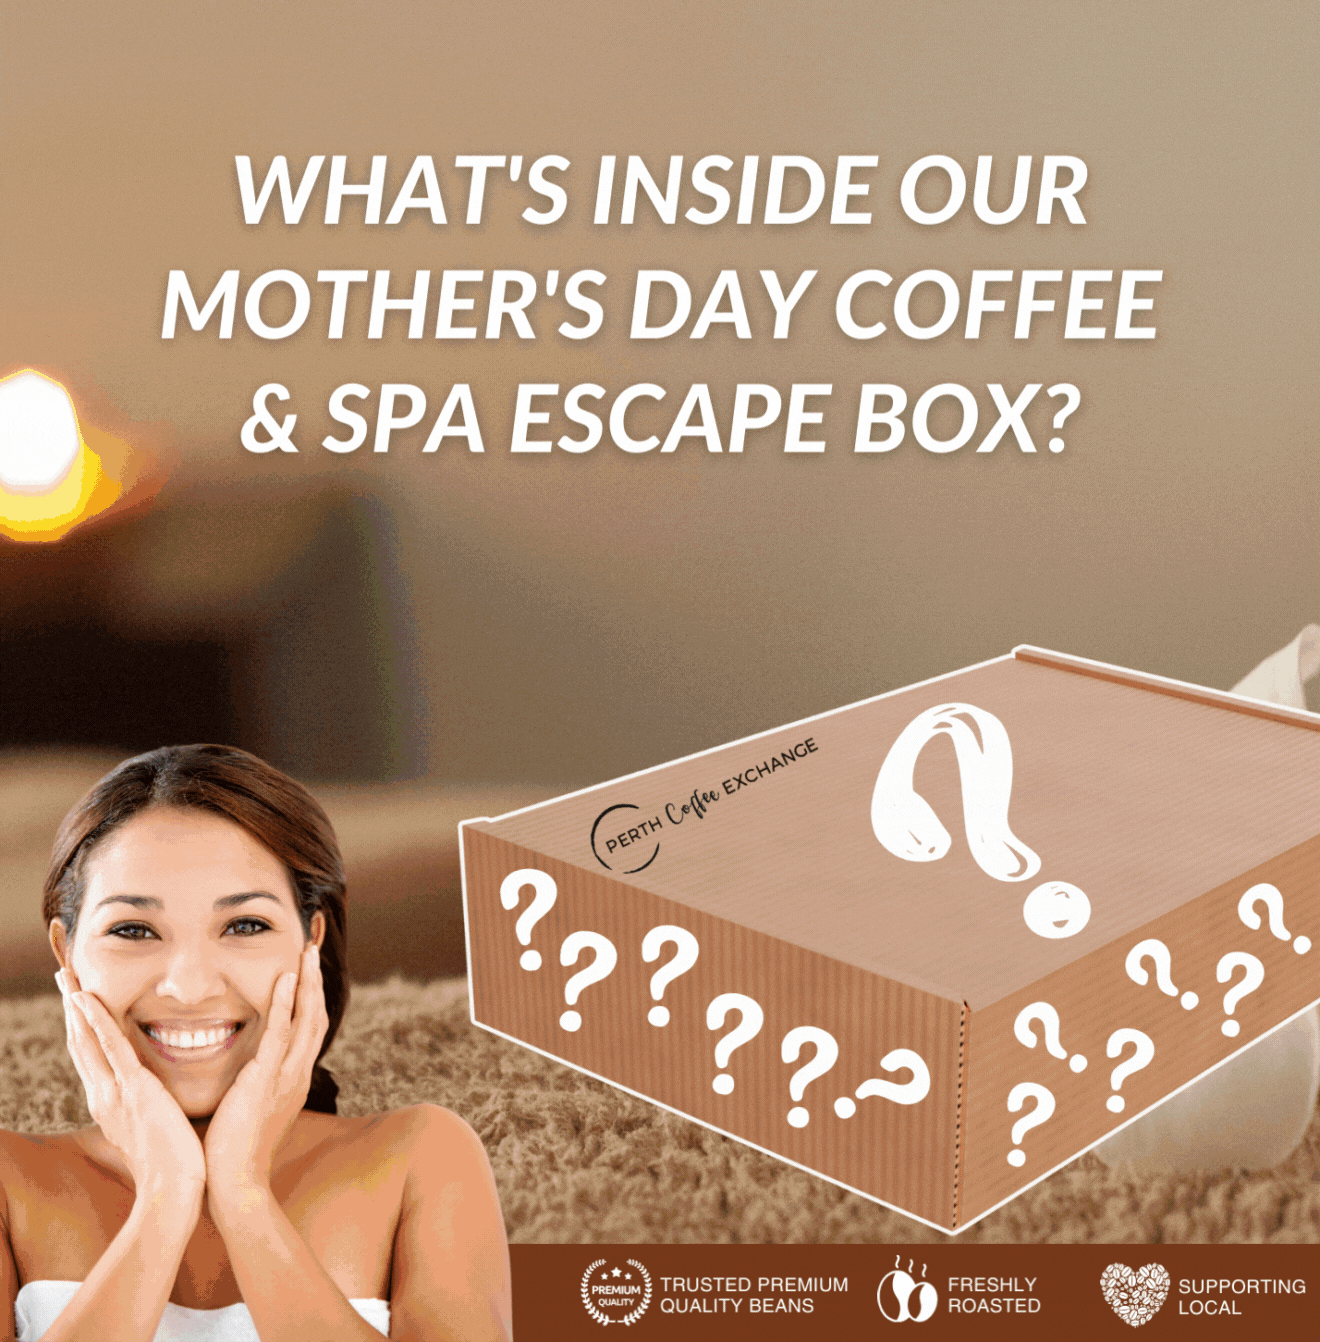 Perth Coffee Exchange - Mystery Box for Mother's Day